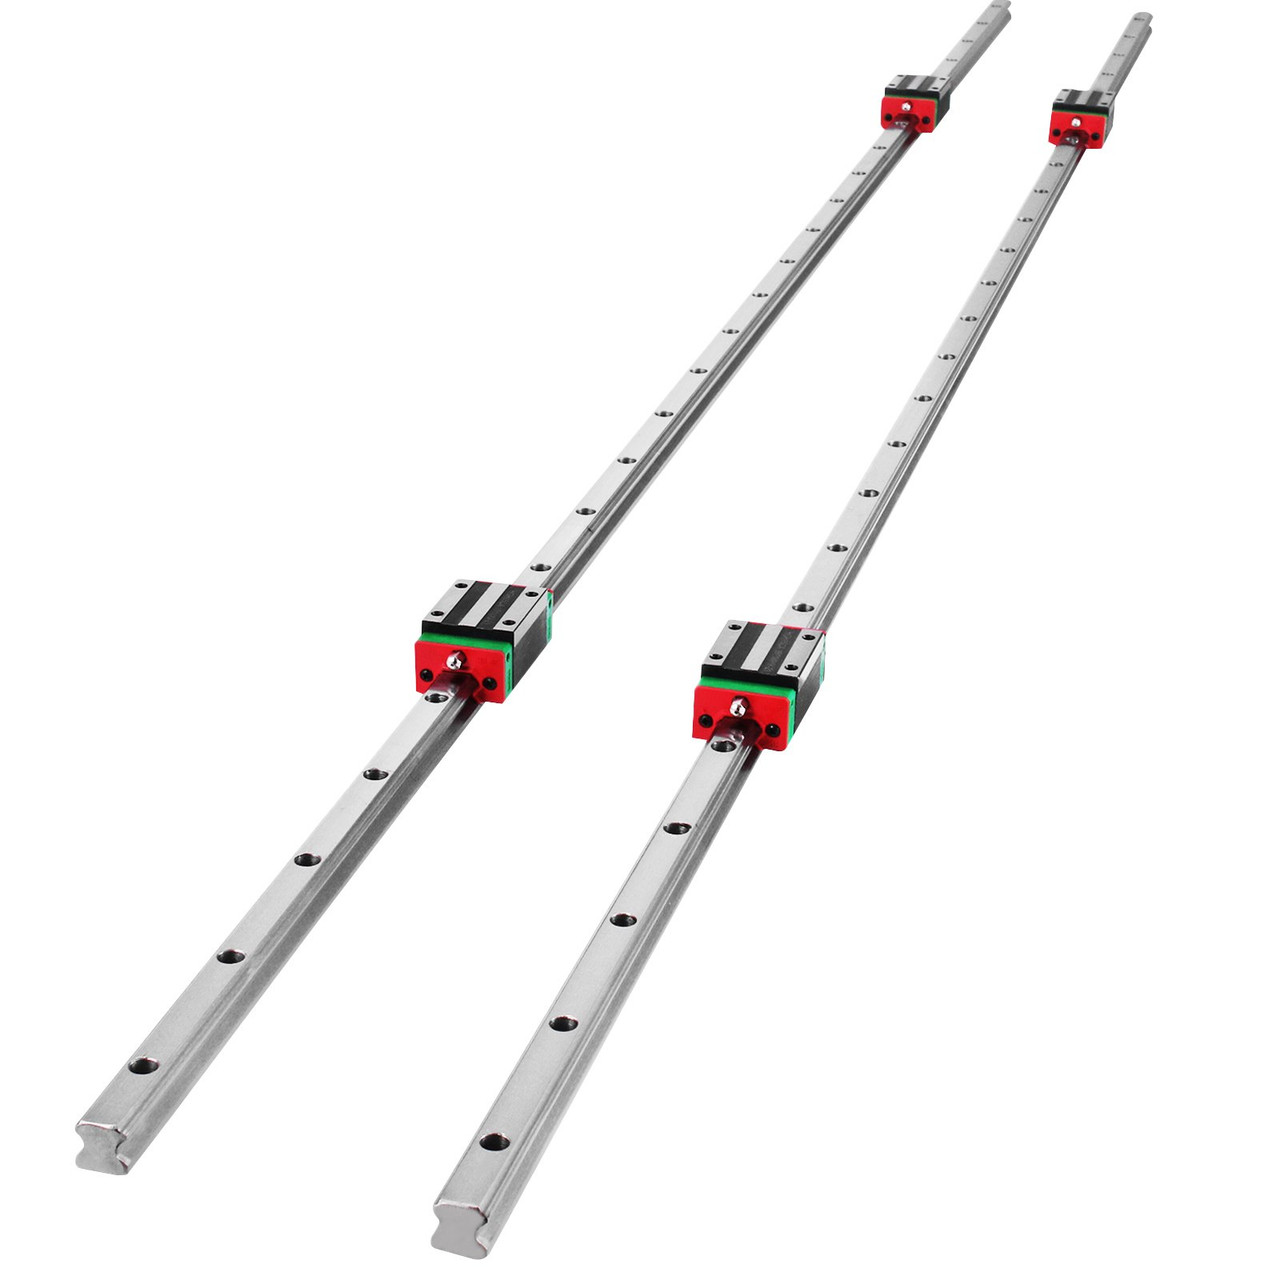 Linear Rail HSR15-1500mm? 2pcs Linear Guideway Rail?4X Square Type Carriage Bearing Blocks?Linear Rail Support for 15mm Slotted Bearings